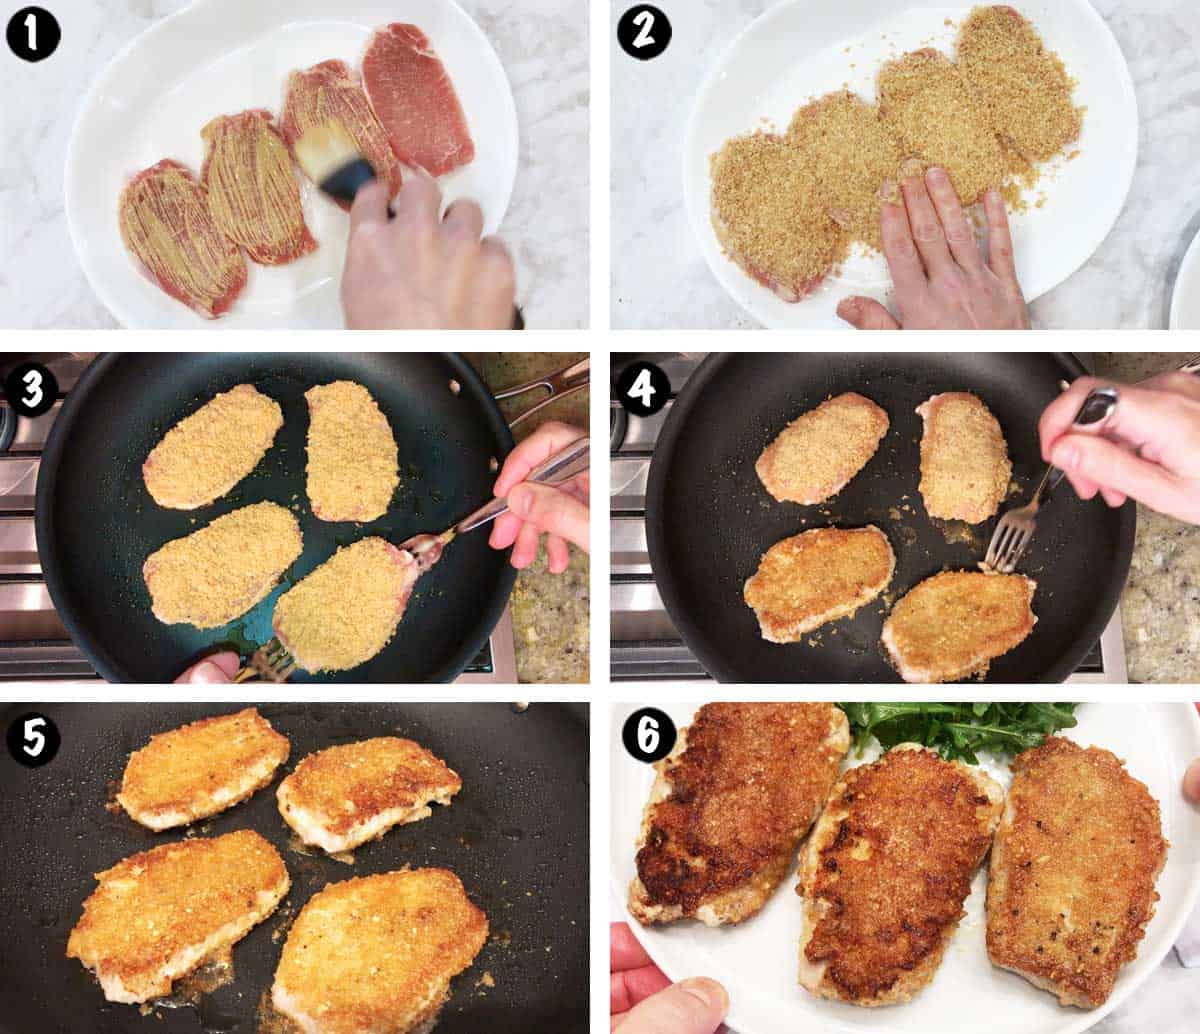 A six-photo collage showing the steps for making keto-fried pork chops.